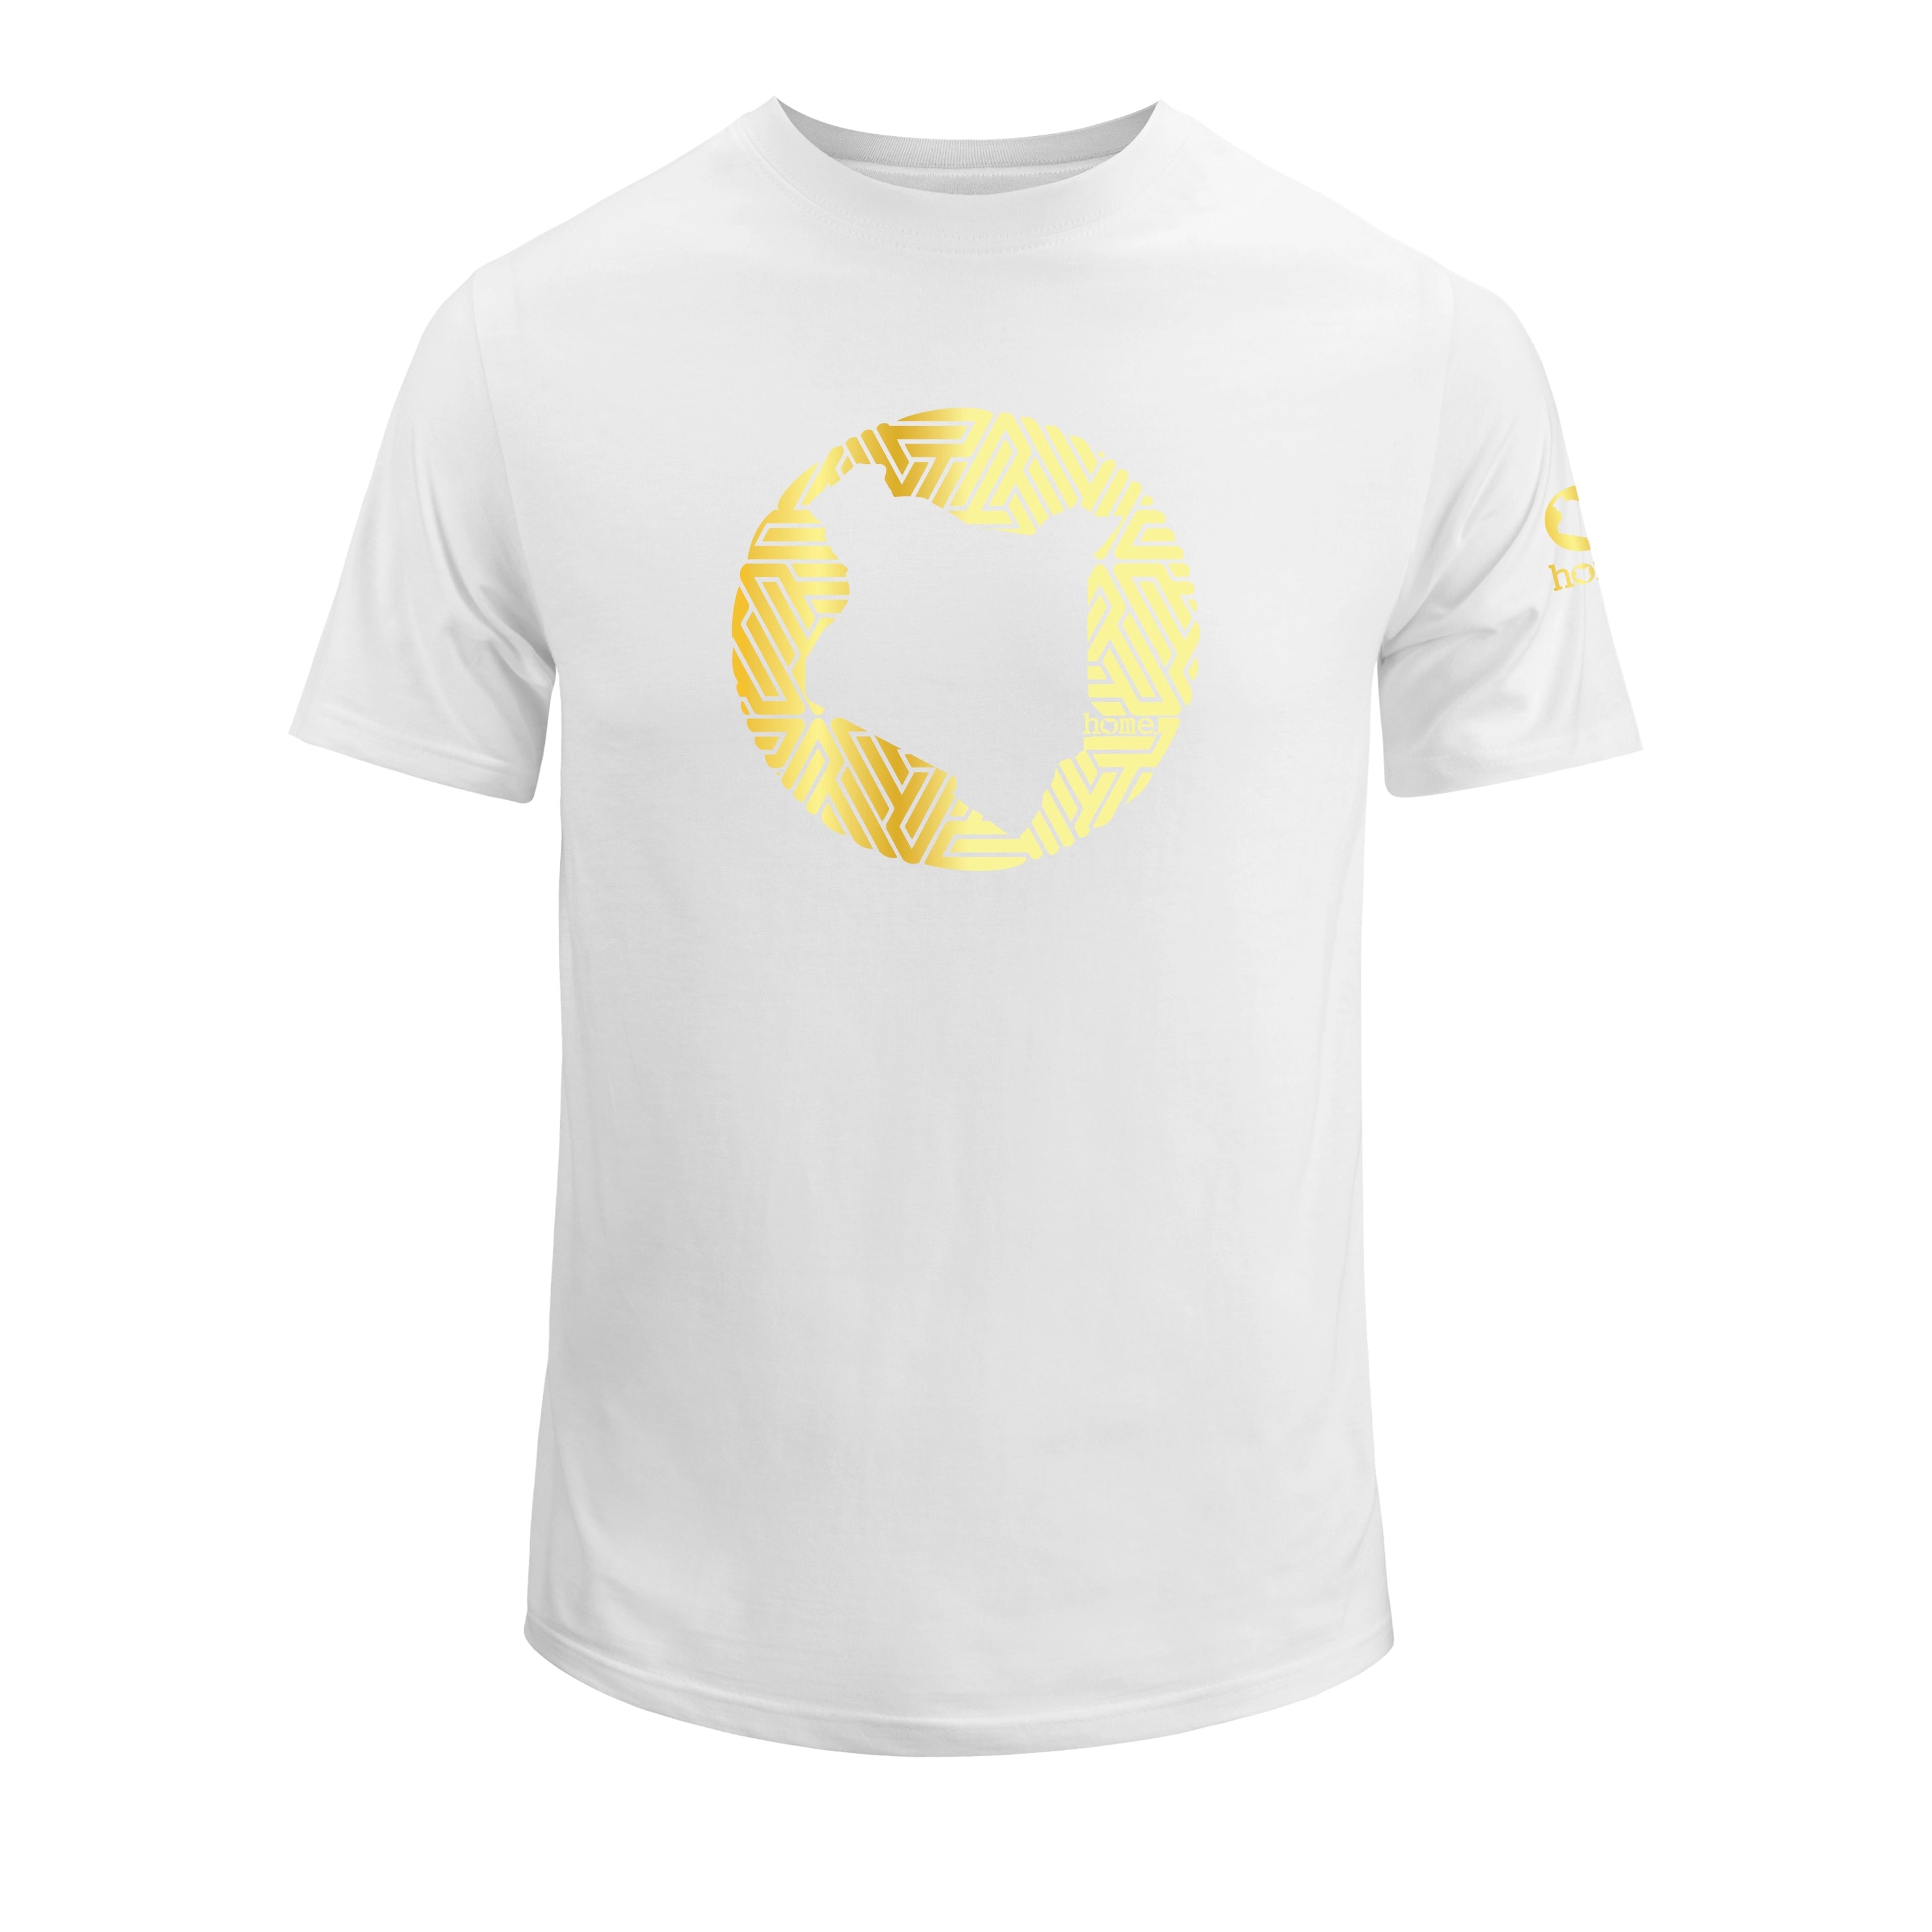 home_254 KIDS SHORT-SLEEVED WHITE T-SHIRT WITH A GOLD MAP PRINT – COTTON PLUS FABRIC